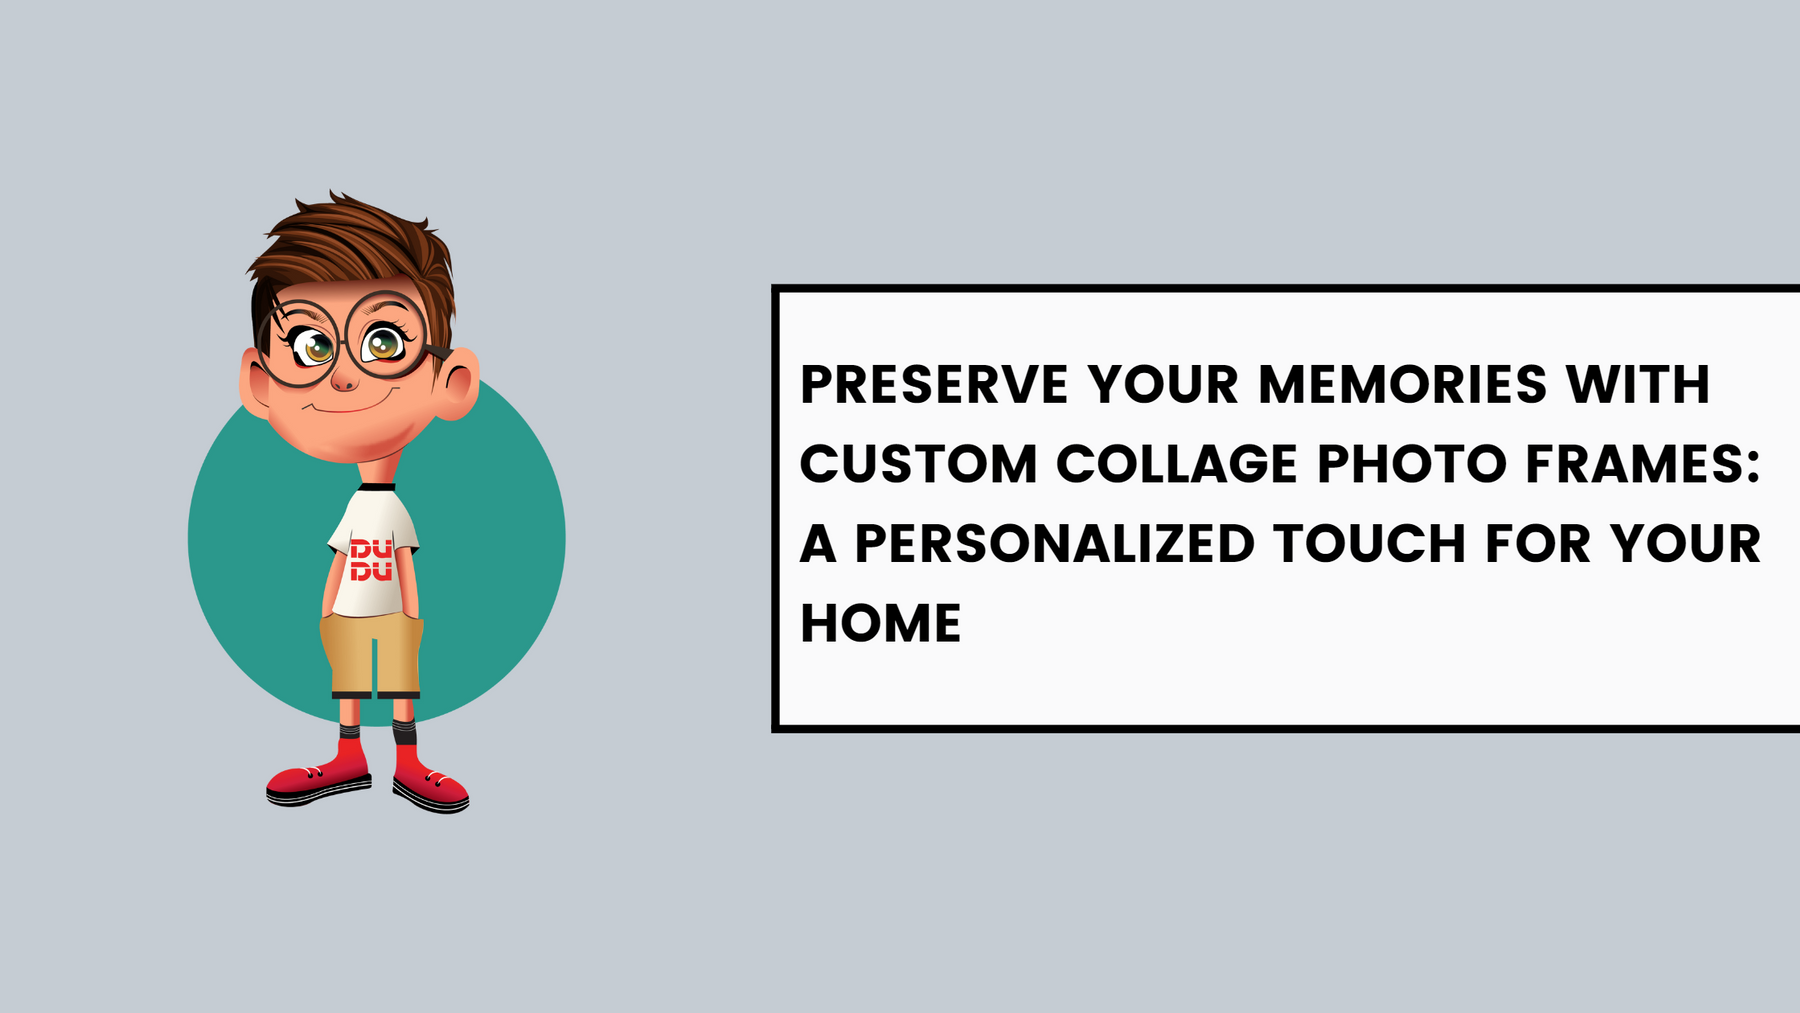 Preserve Your Memories with Custom Collage Photo Frames: A Personalized Touch for Your Home